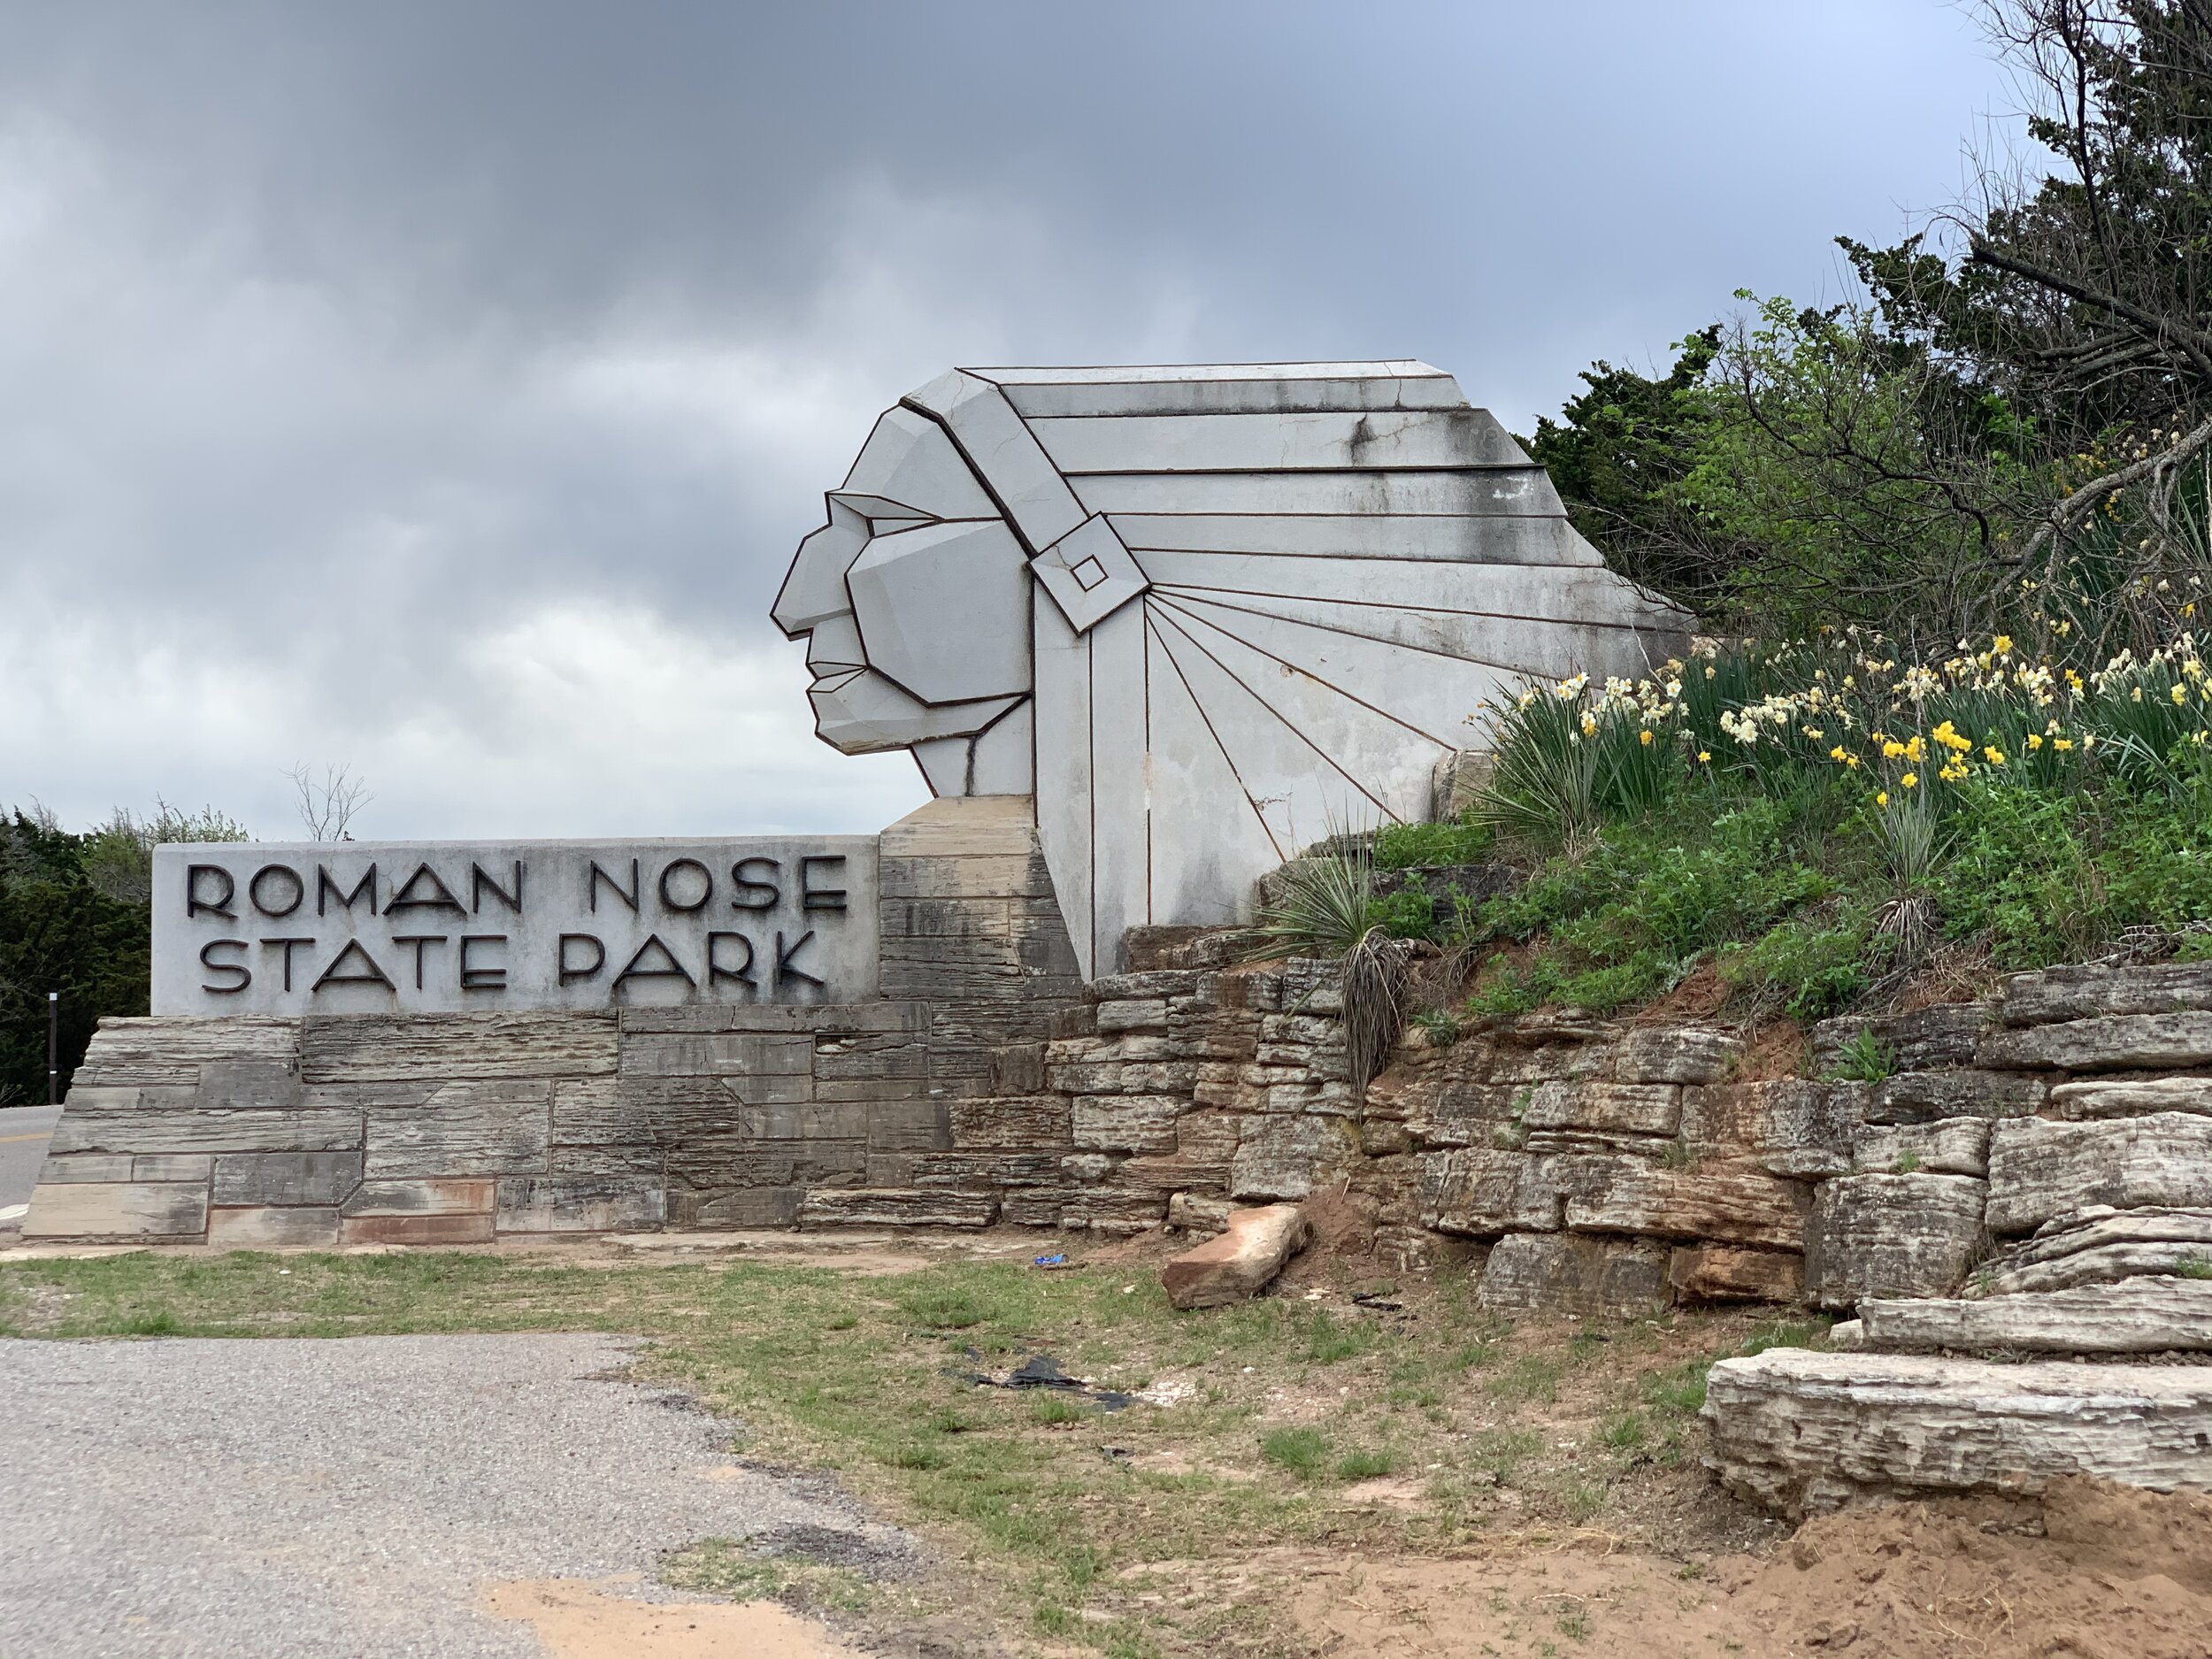    In Oklahoma we camped in Roman Nose State Park. Henry Roman Nose was a highly respected Cheyenne Indian Chief recognized as a vocal proponent of obtaining education and training while keeping the Cheyenne culture. He died in 1917.   